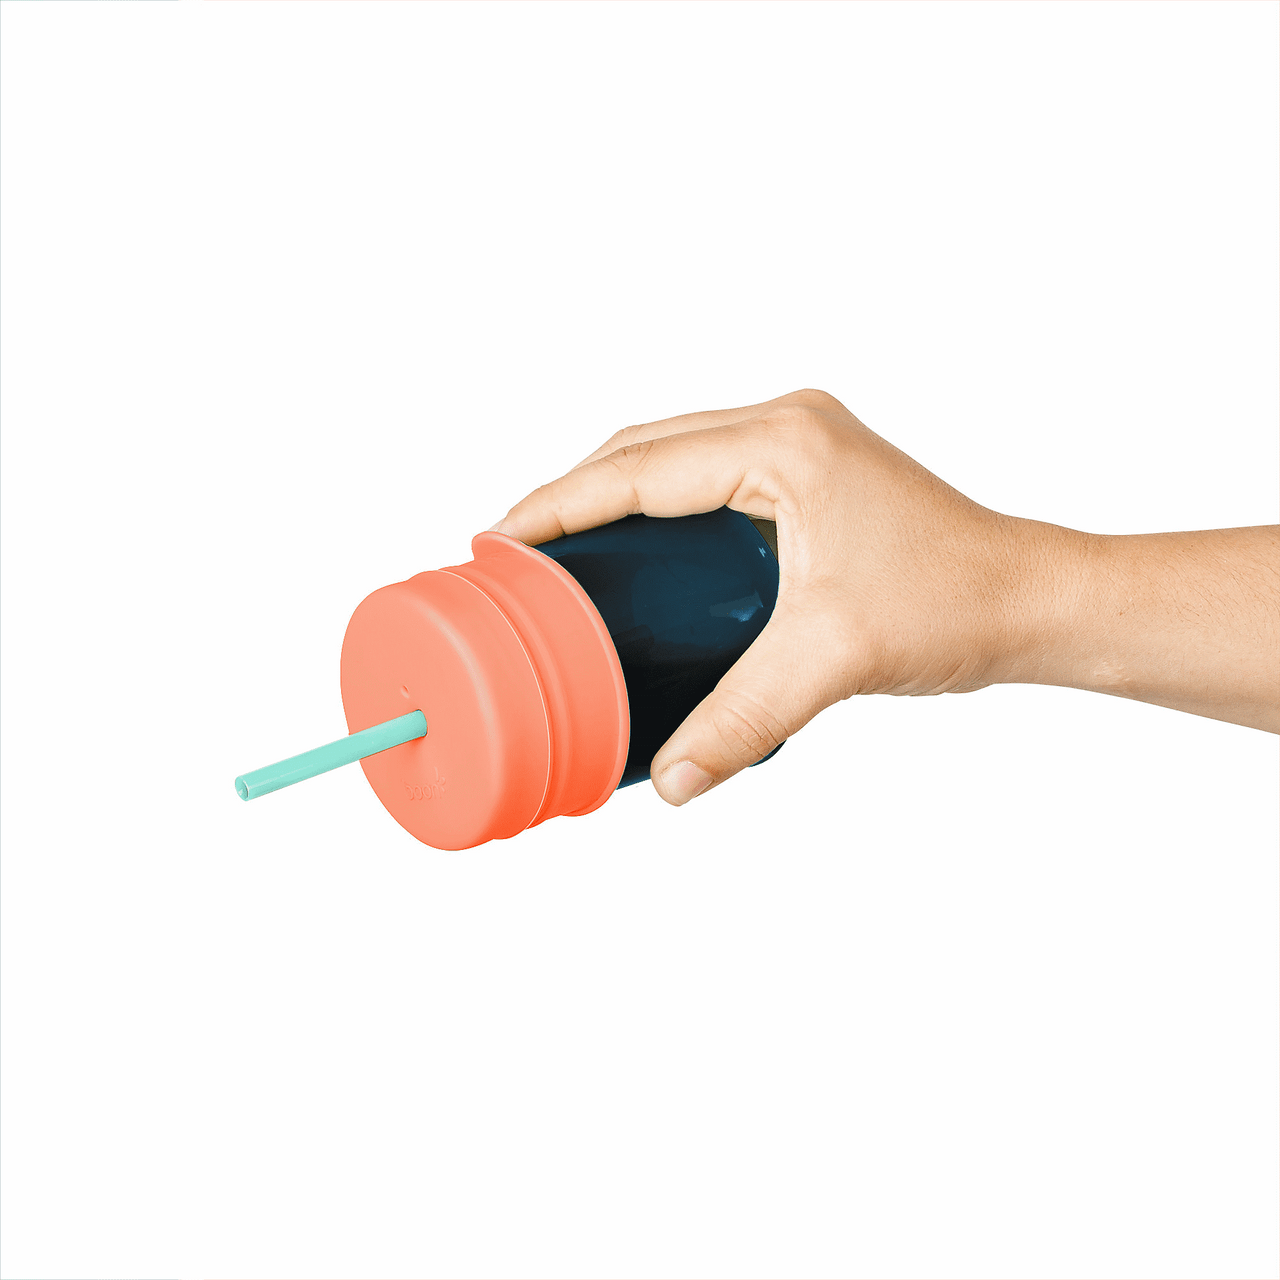 Boon Swig 9 oz. Silicone Straw Cup in Mint